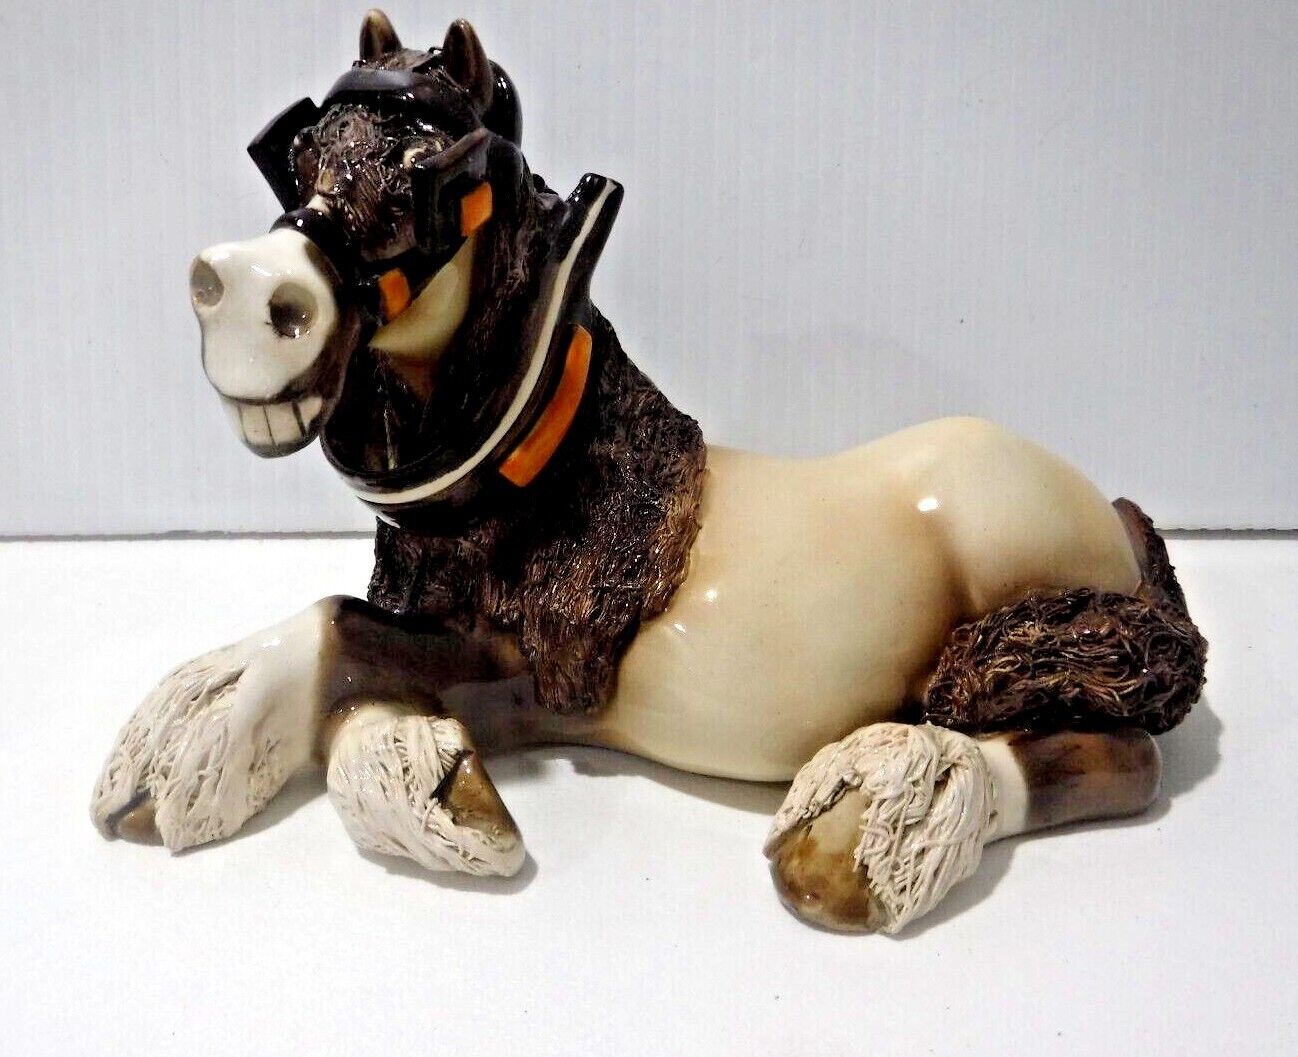 Cheval Draft Horse Figurine Ceramic Comical Horse Model 8 In. Long X 5 In. Tall